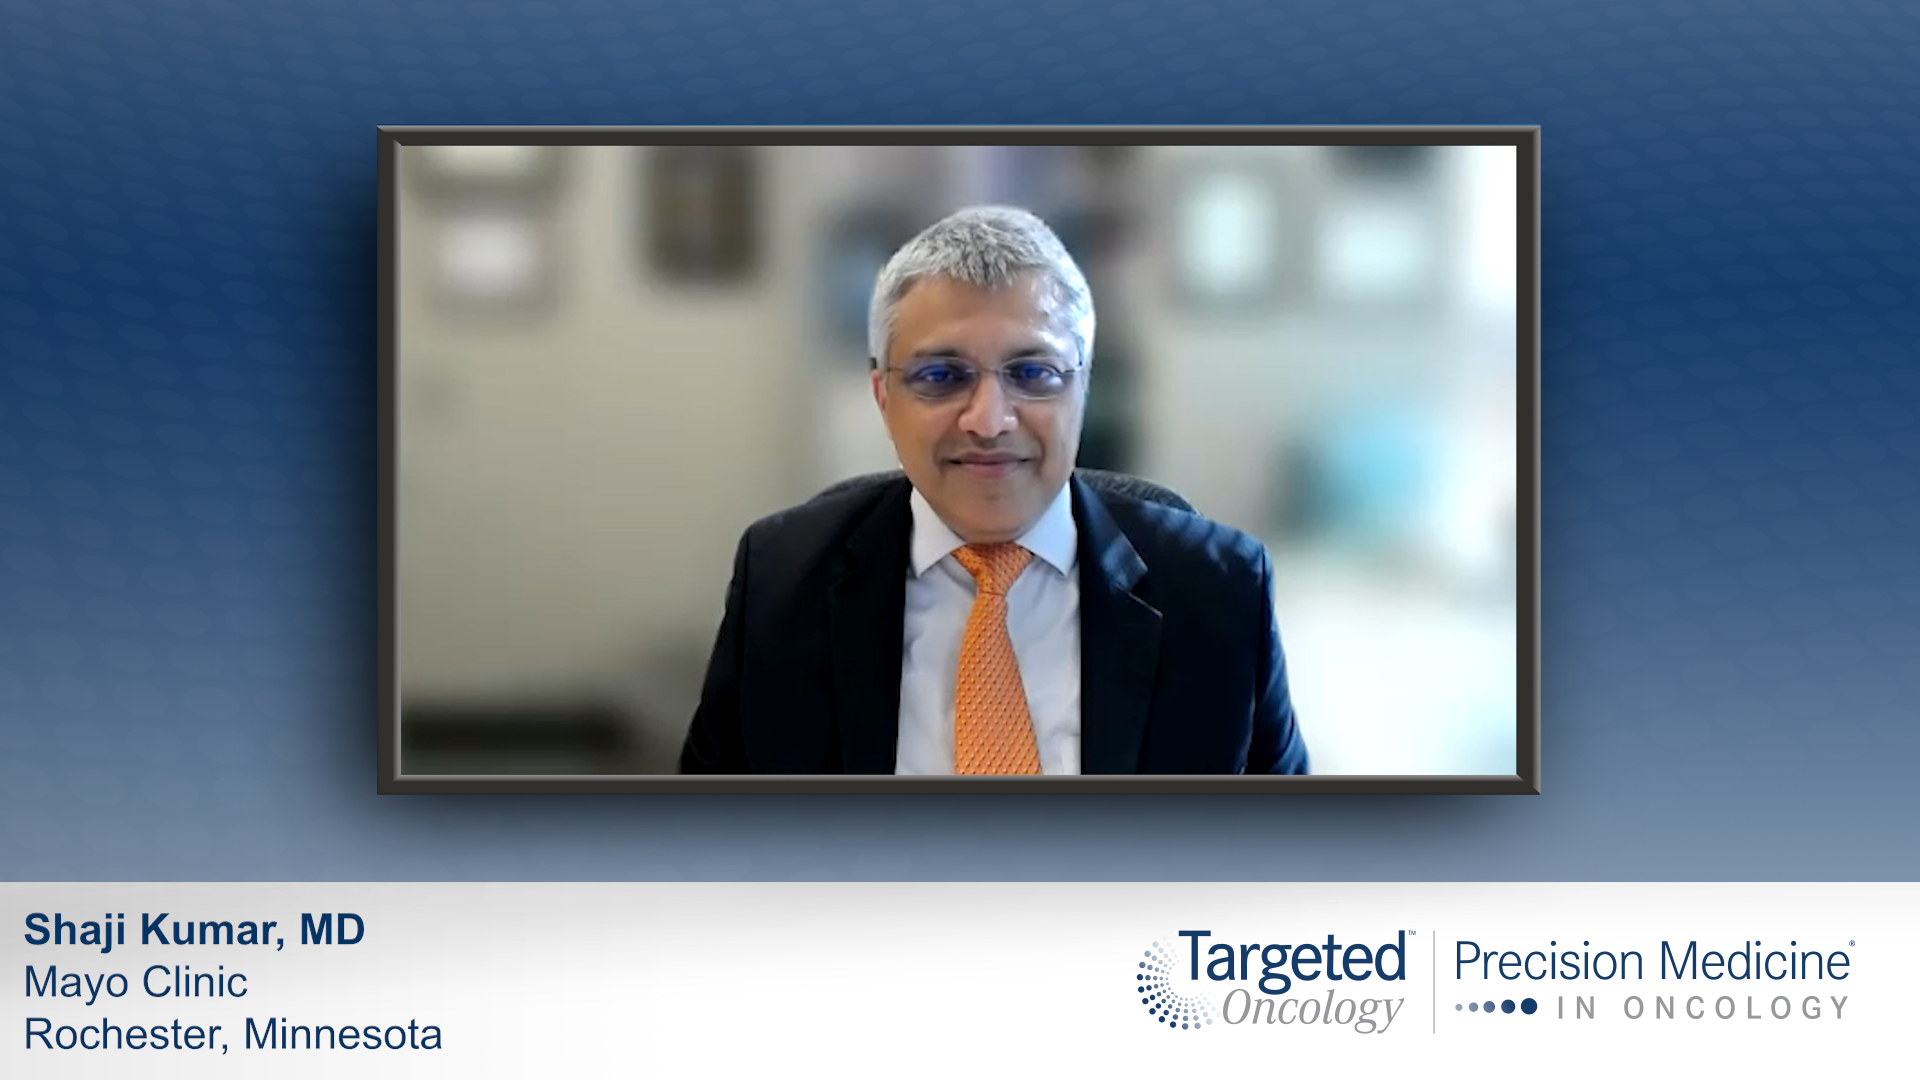 Venetoclax for Multiple Myeloma: The Phase 3 BELLINI Trial